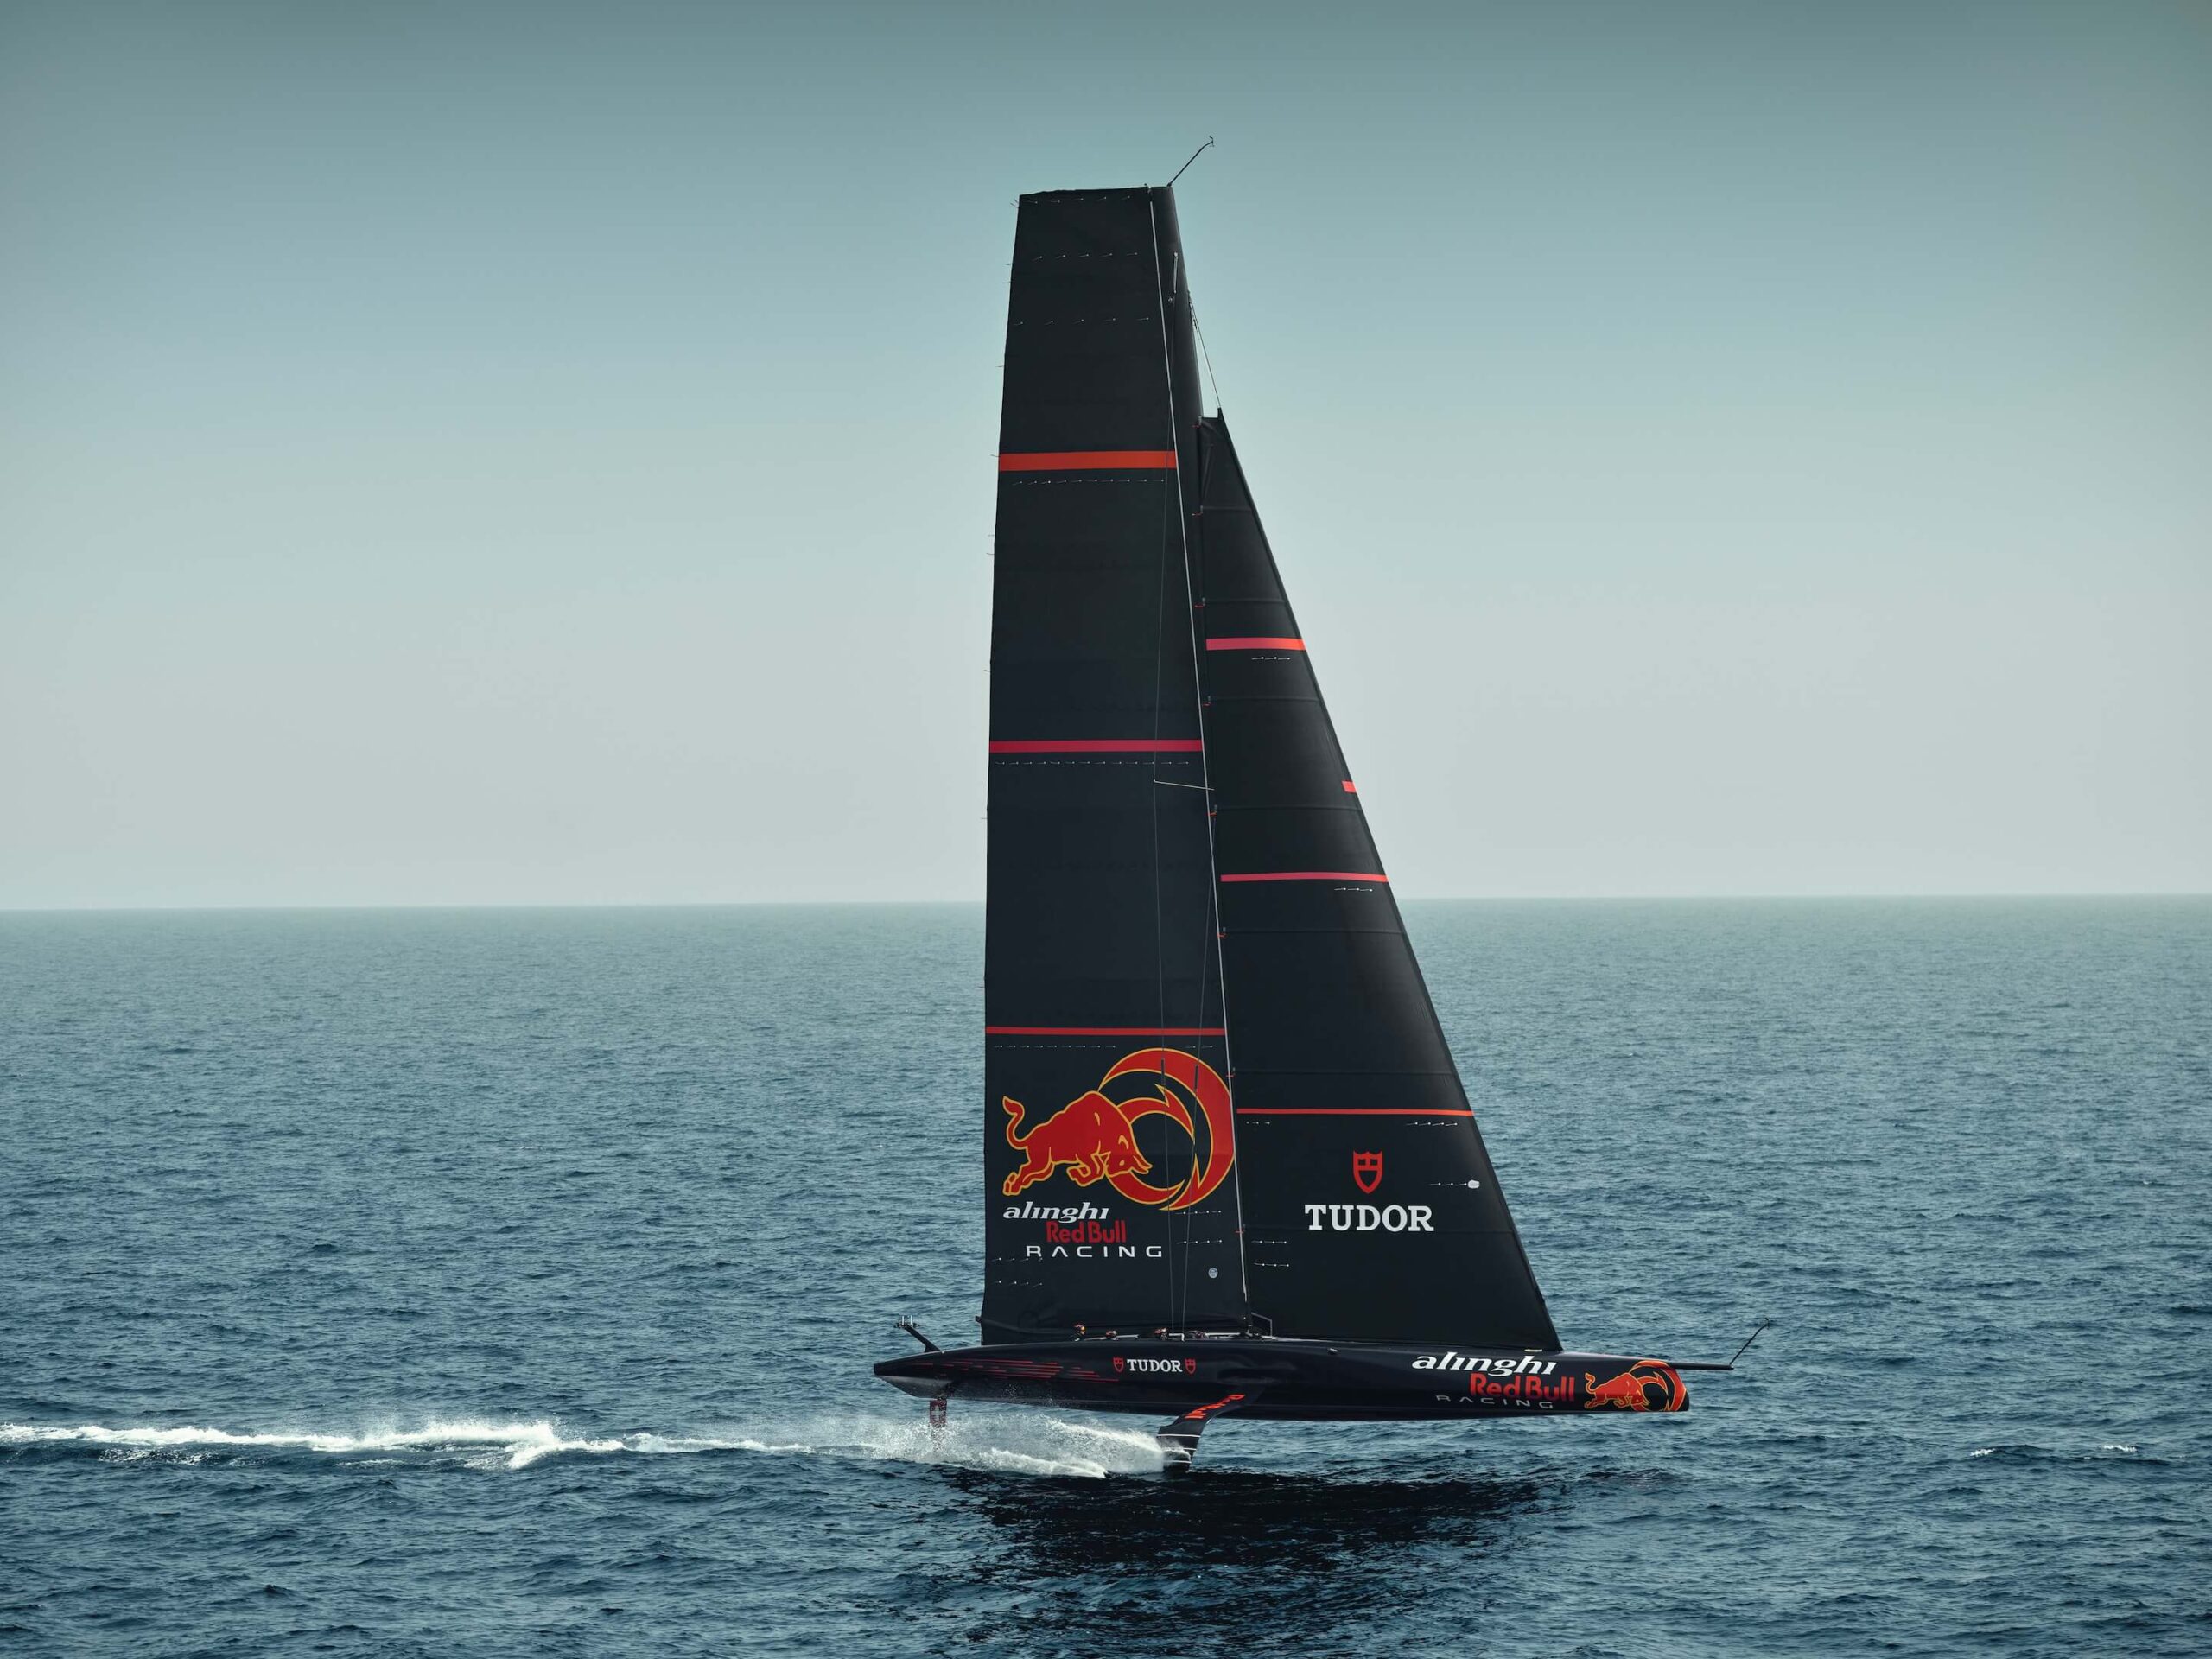 Alinghi Red Bull Racing and TUDOR collaborated to create watches that excel in yacht racing